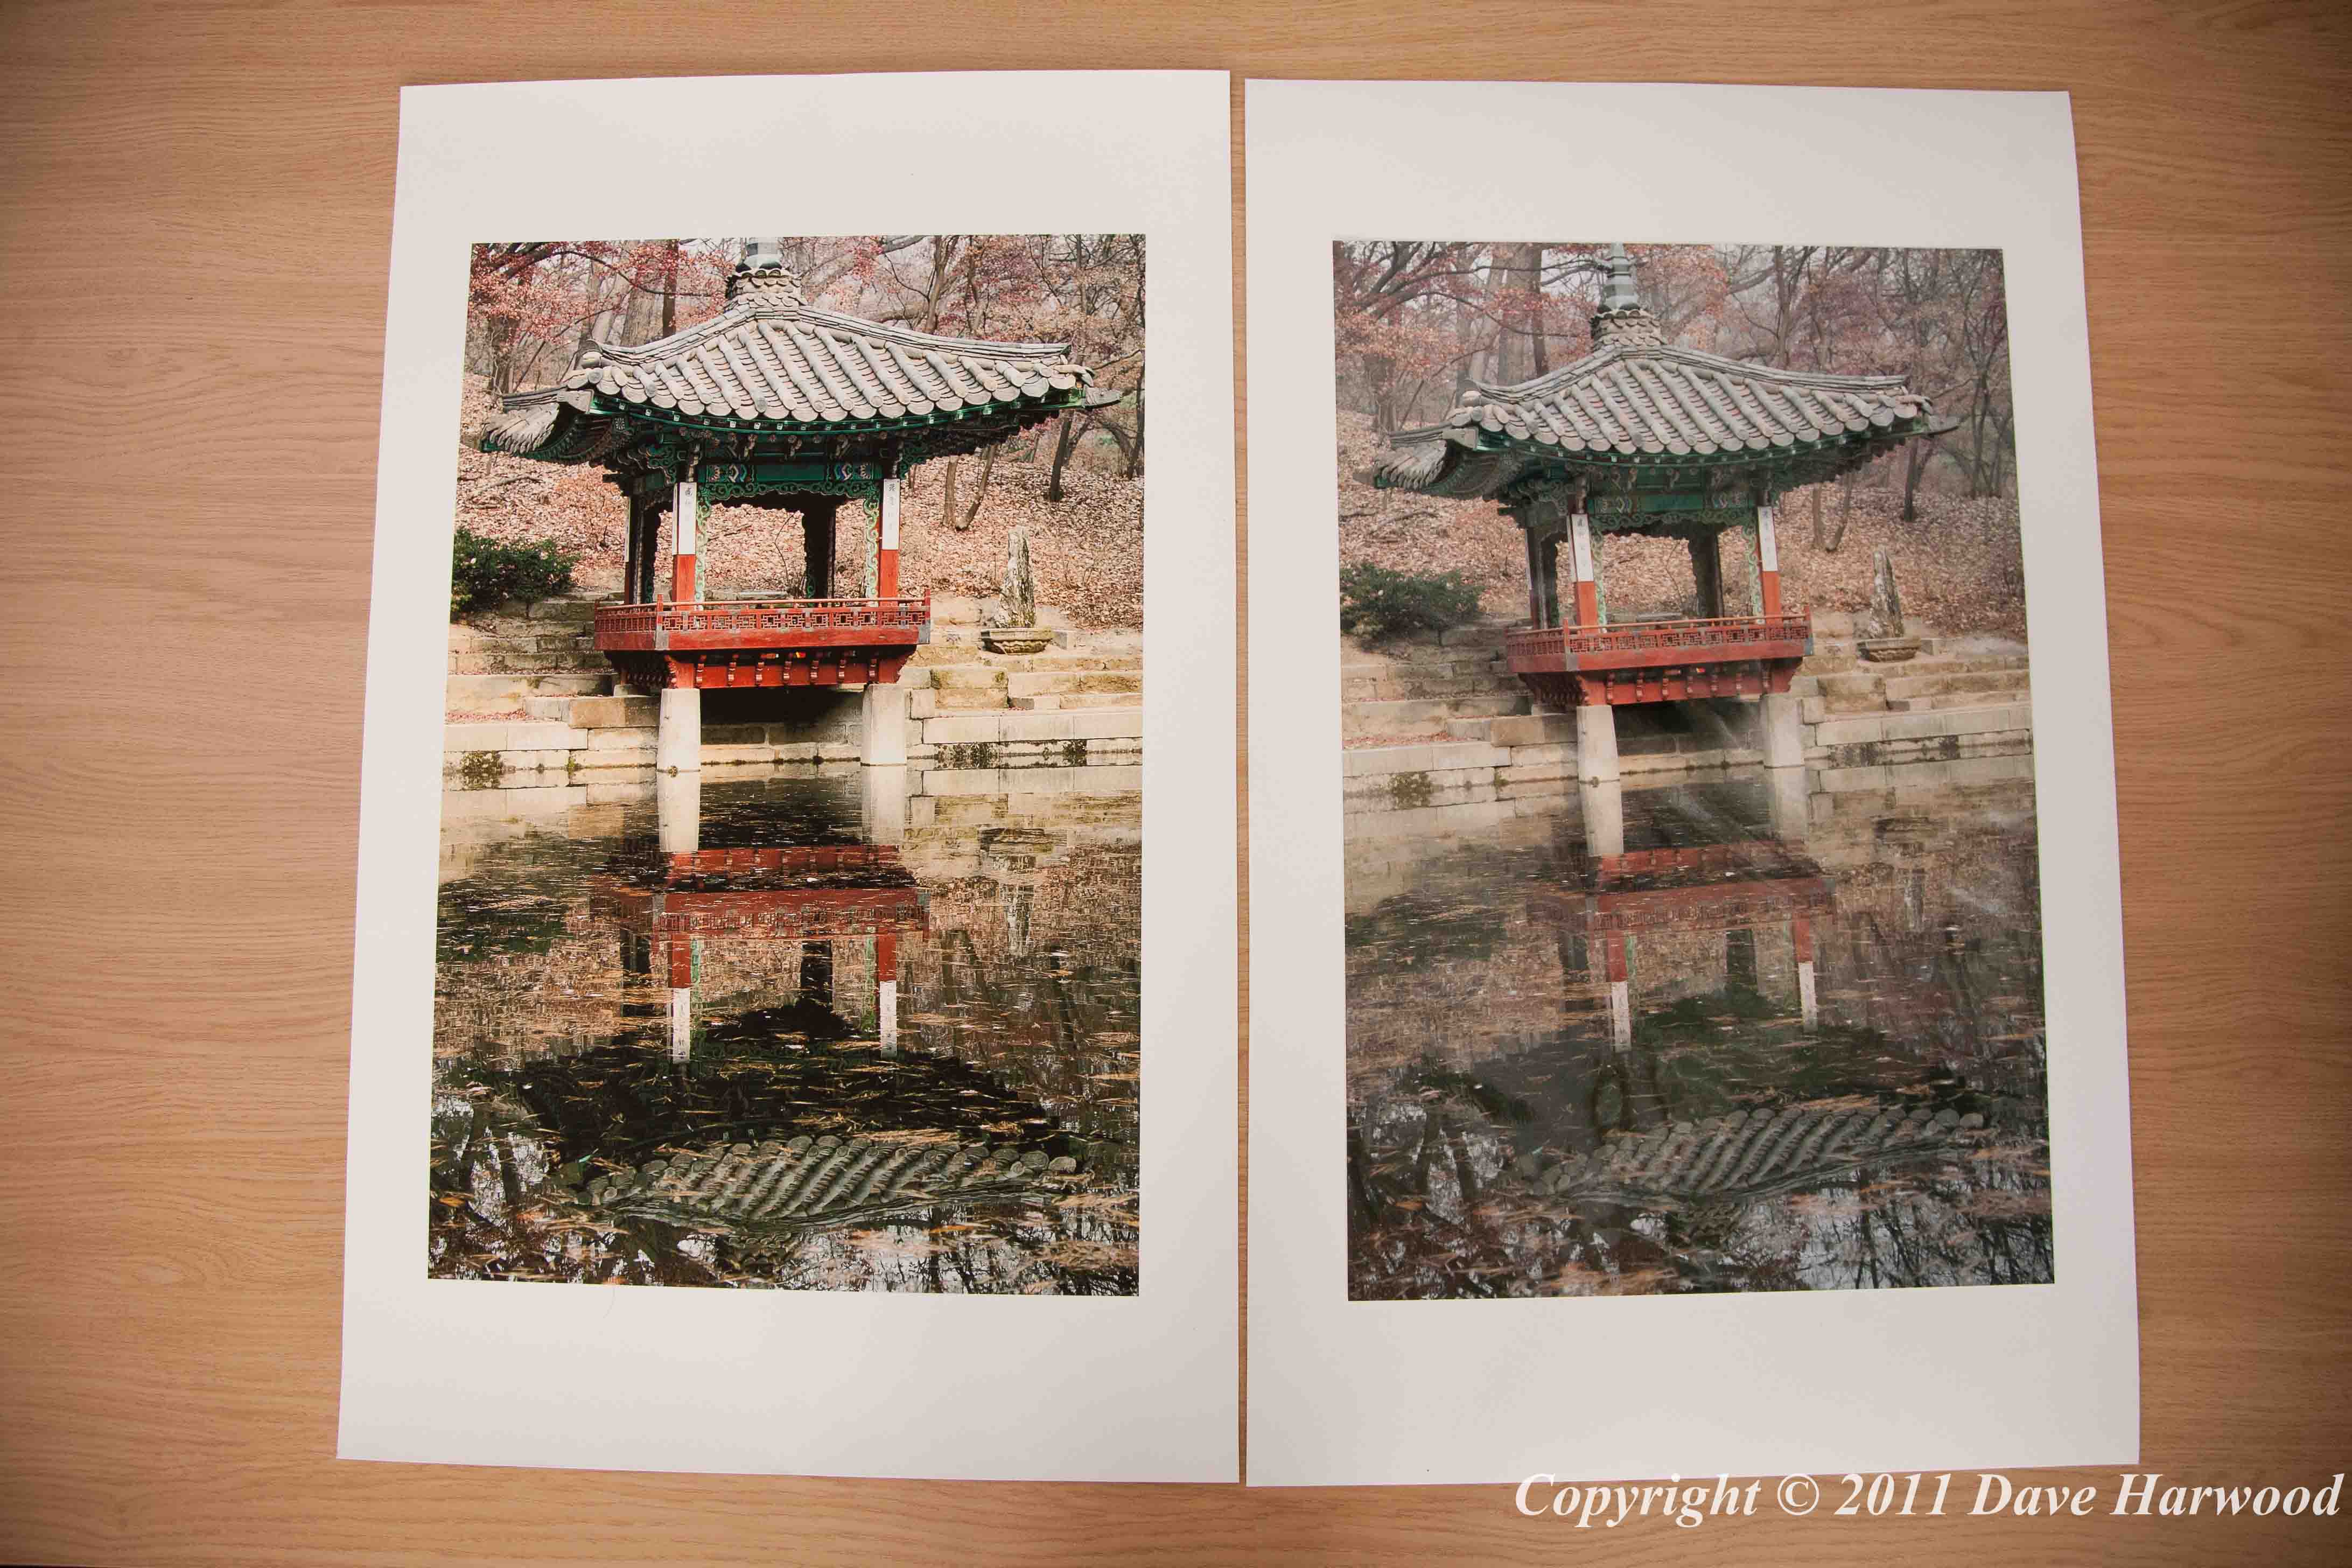 Giclée printing, can you the difference?